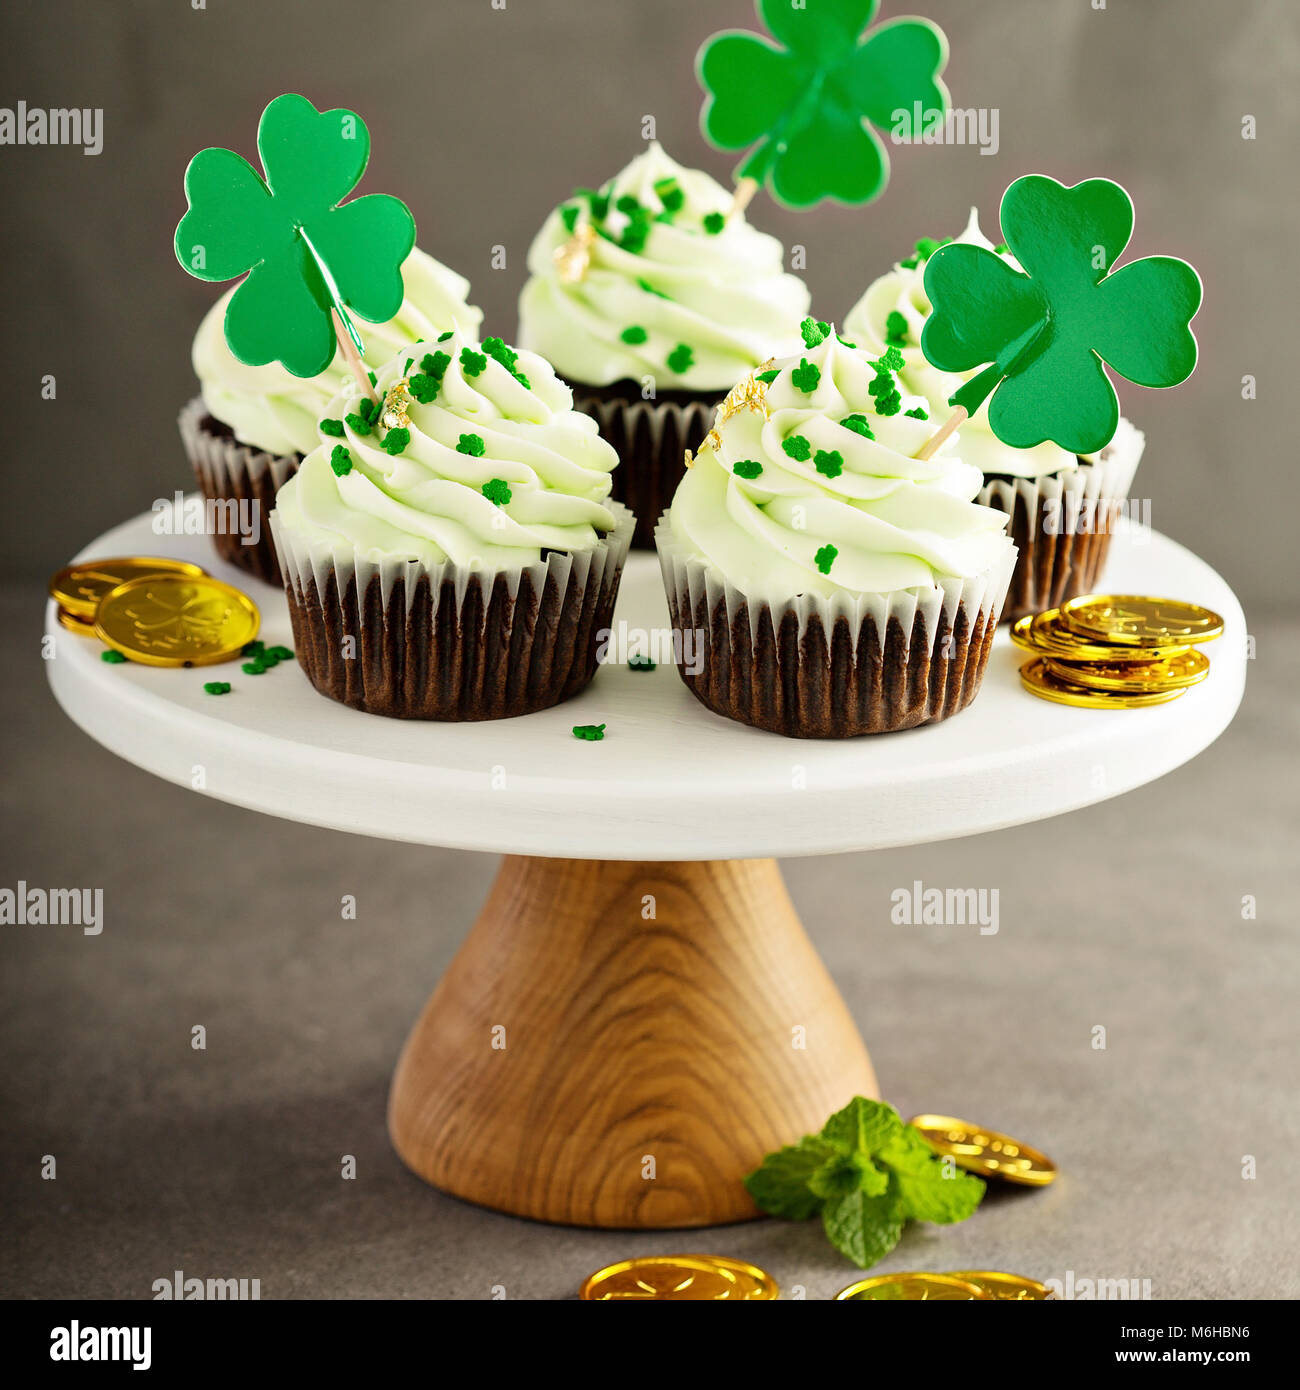 St Patricks day chocolate mint cupcakes Banque D'Images